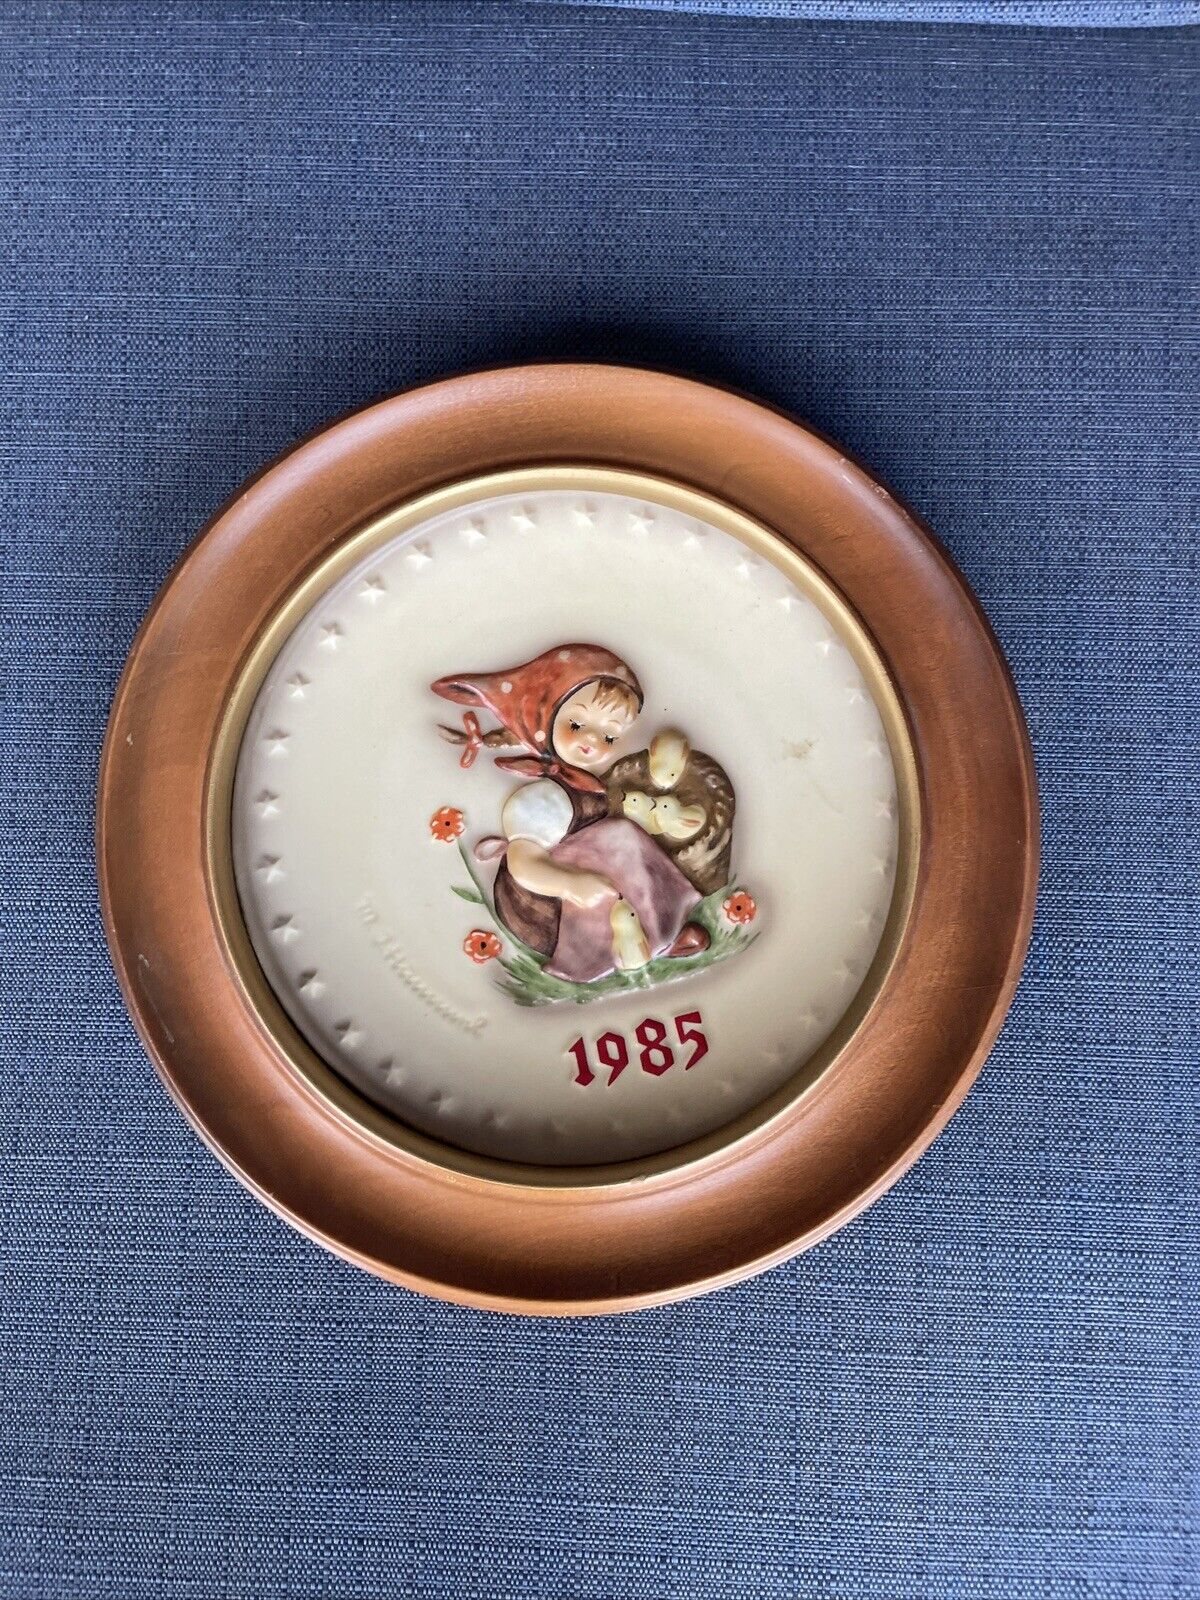 M.I. HUMMEL Goebel 15th ANNUAL PLATE 1985 CHICK GIRL #278 With Wood Frame